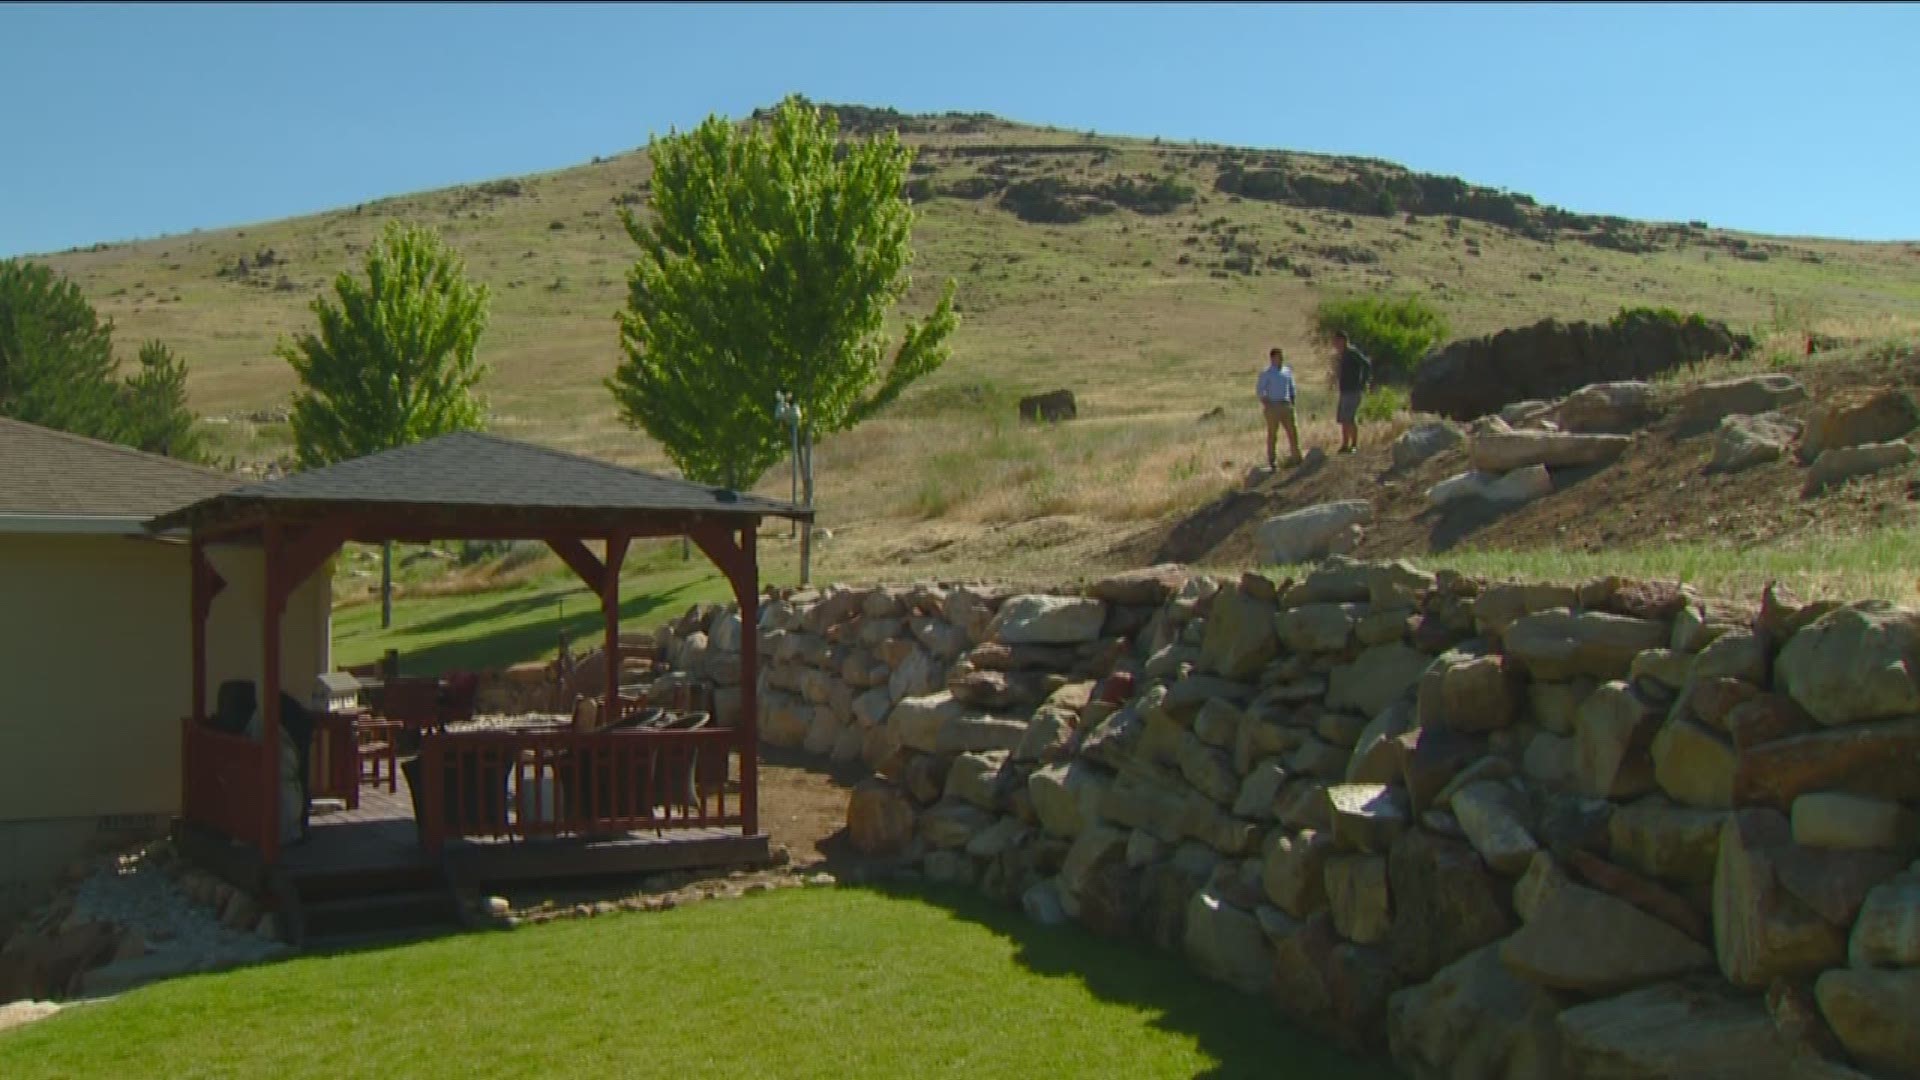 Table Rock Fire motivates neighbors to become firewise